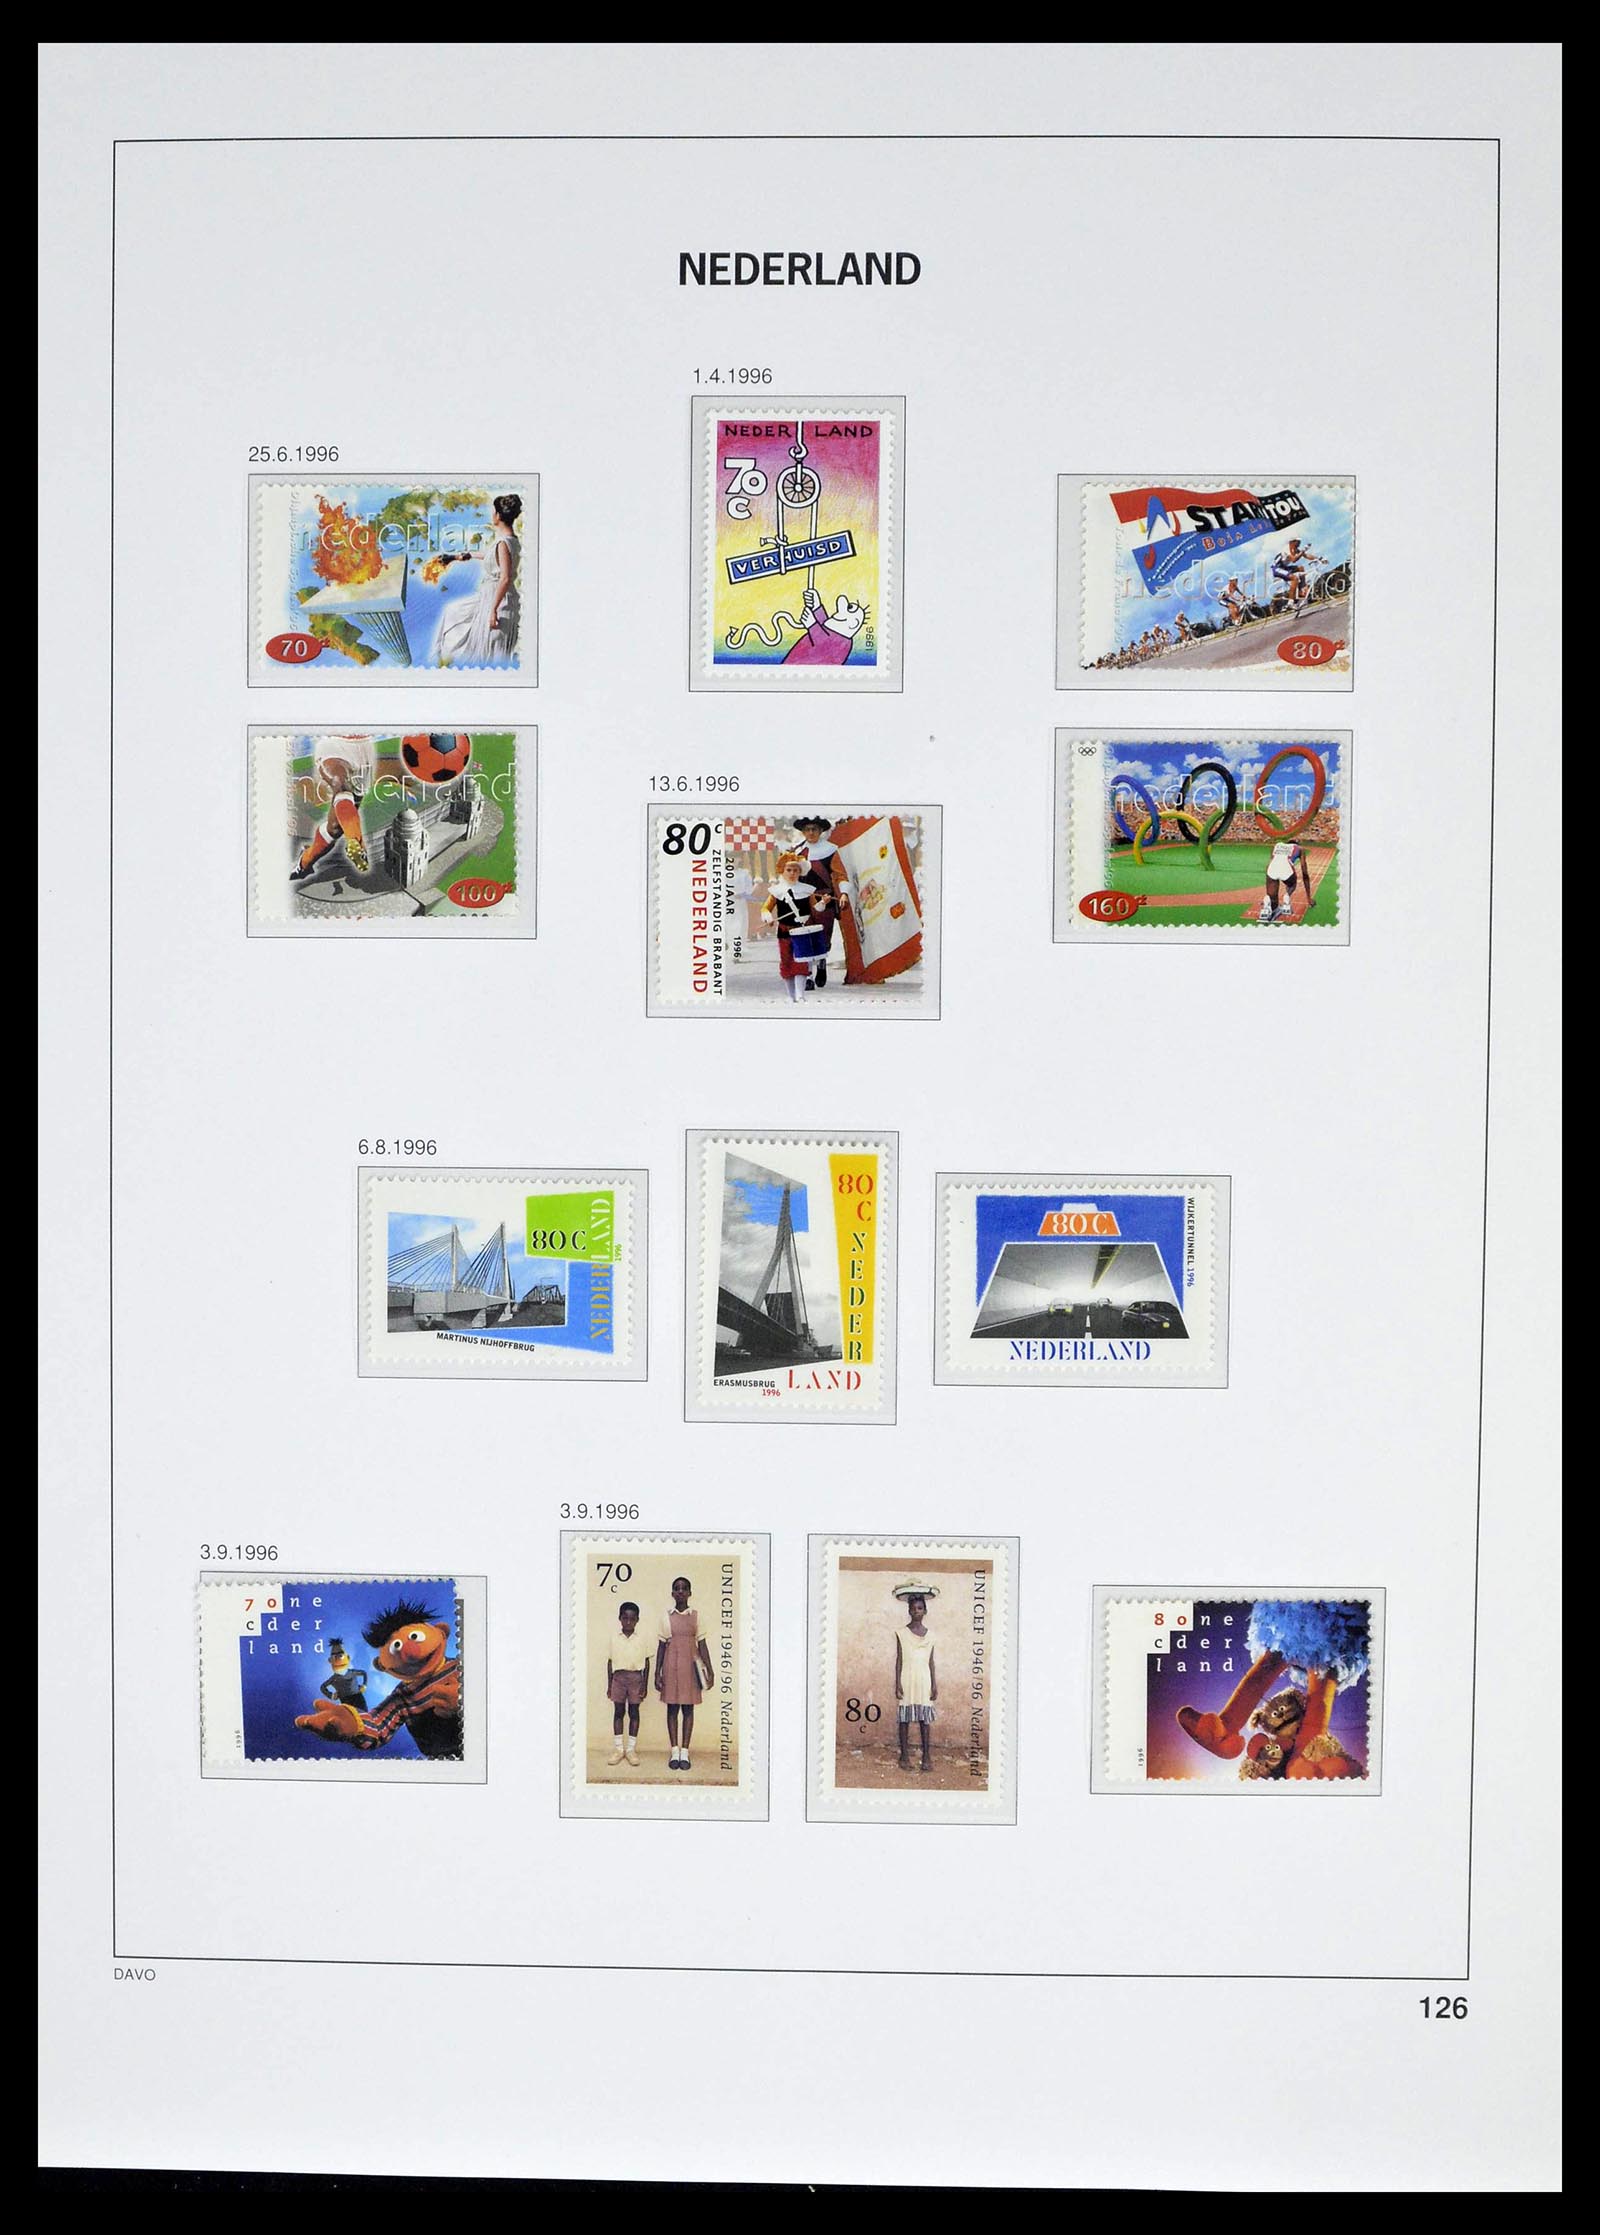 39136 0082 - Stamp collection 39136 Netherlands 1975-2020!